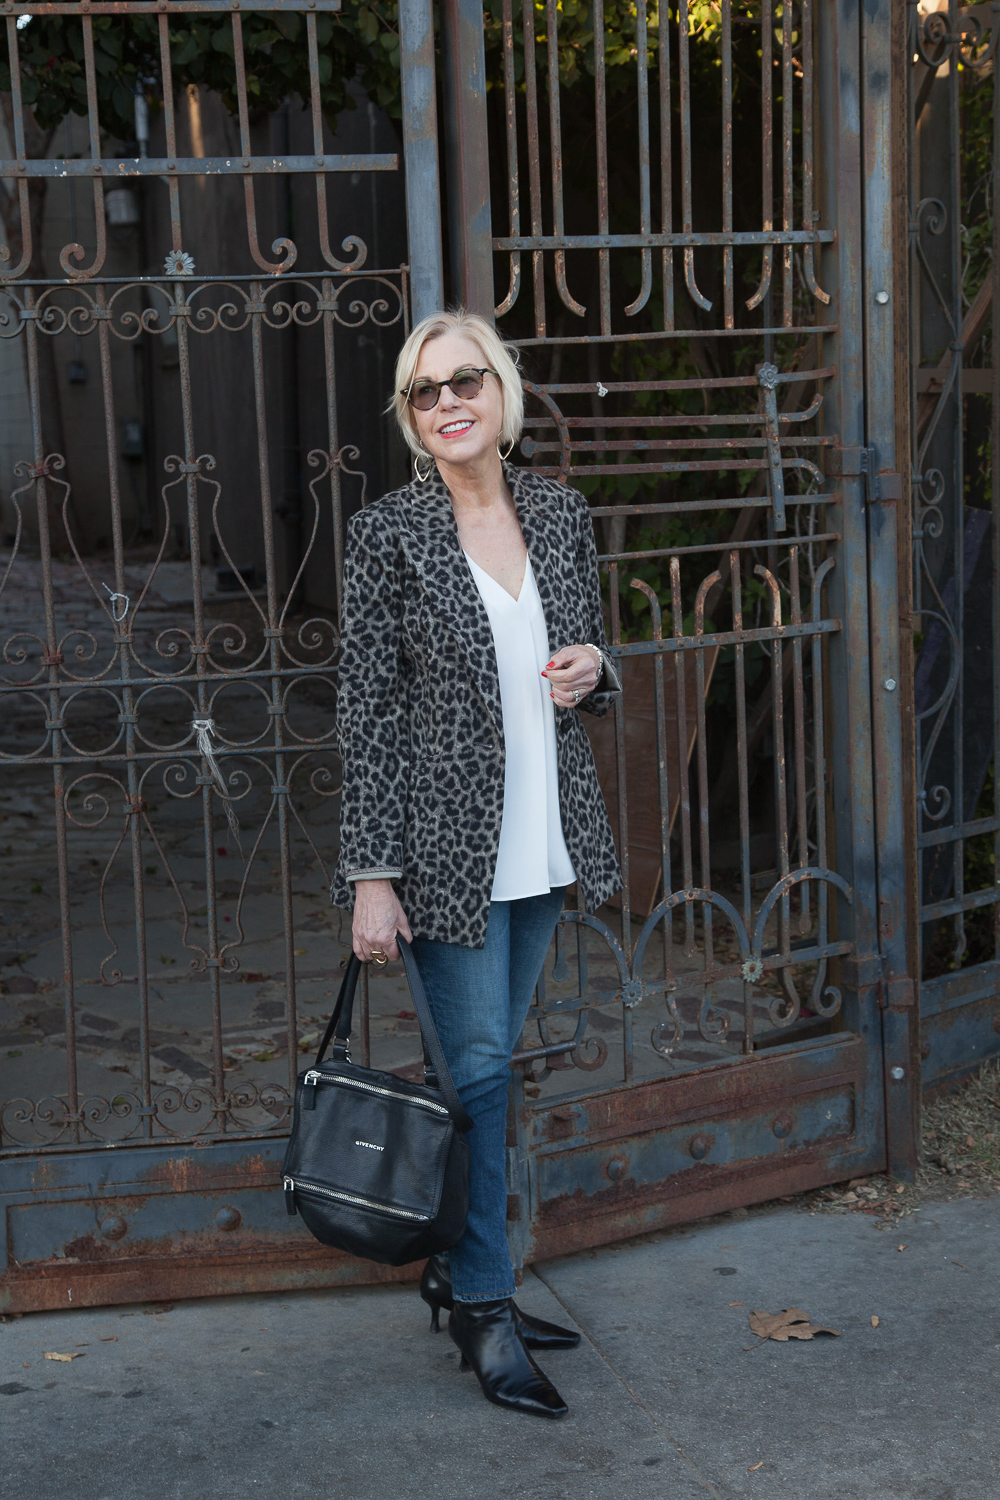 Style blogger Susan B. of une femme d'un certain age wears a casual date night look with a leopard jacket from cabi, jeans, and black boots.